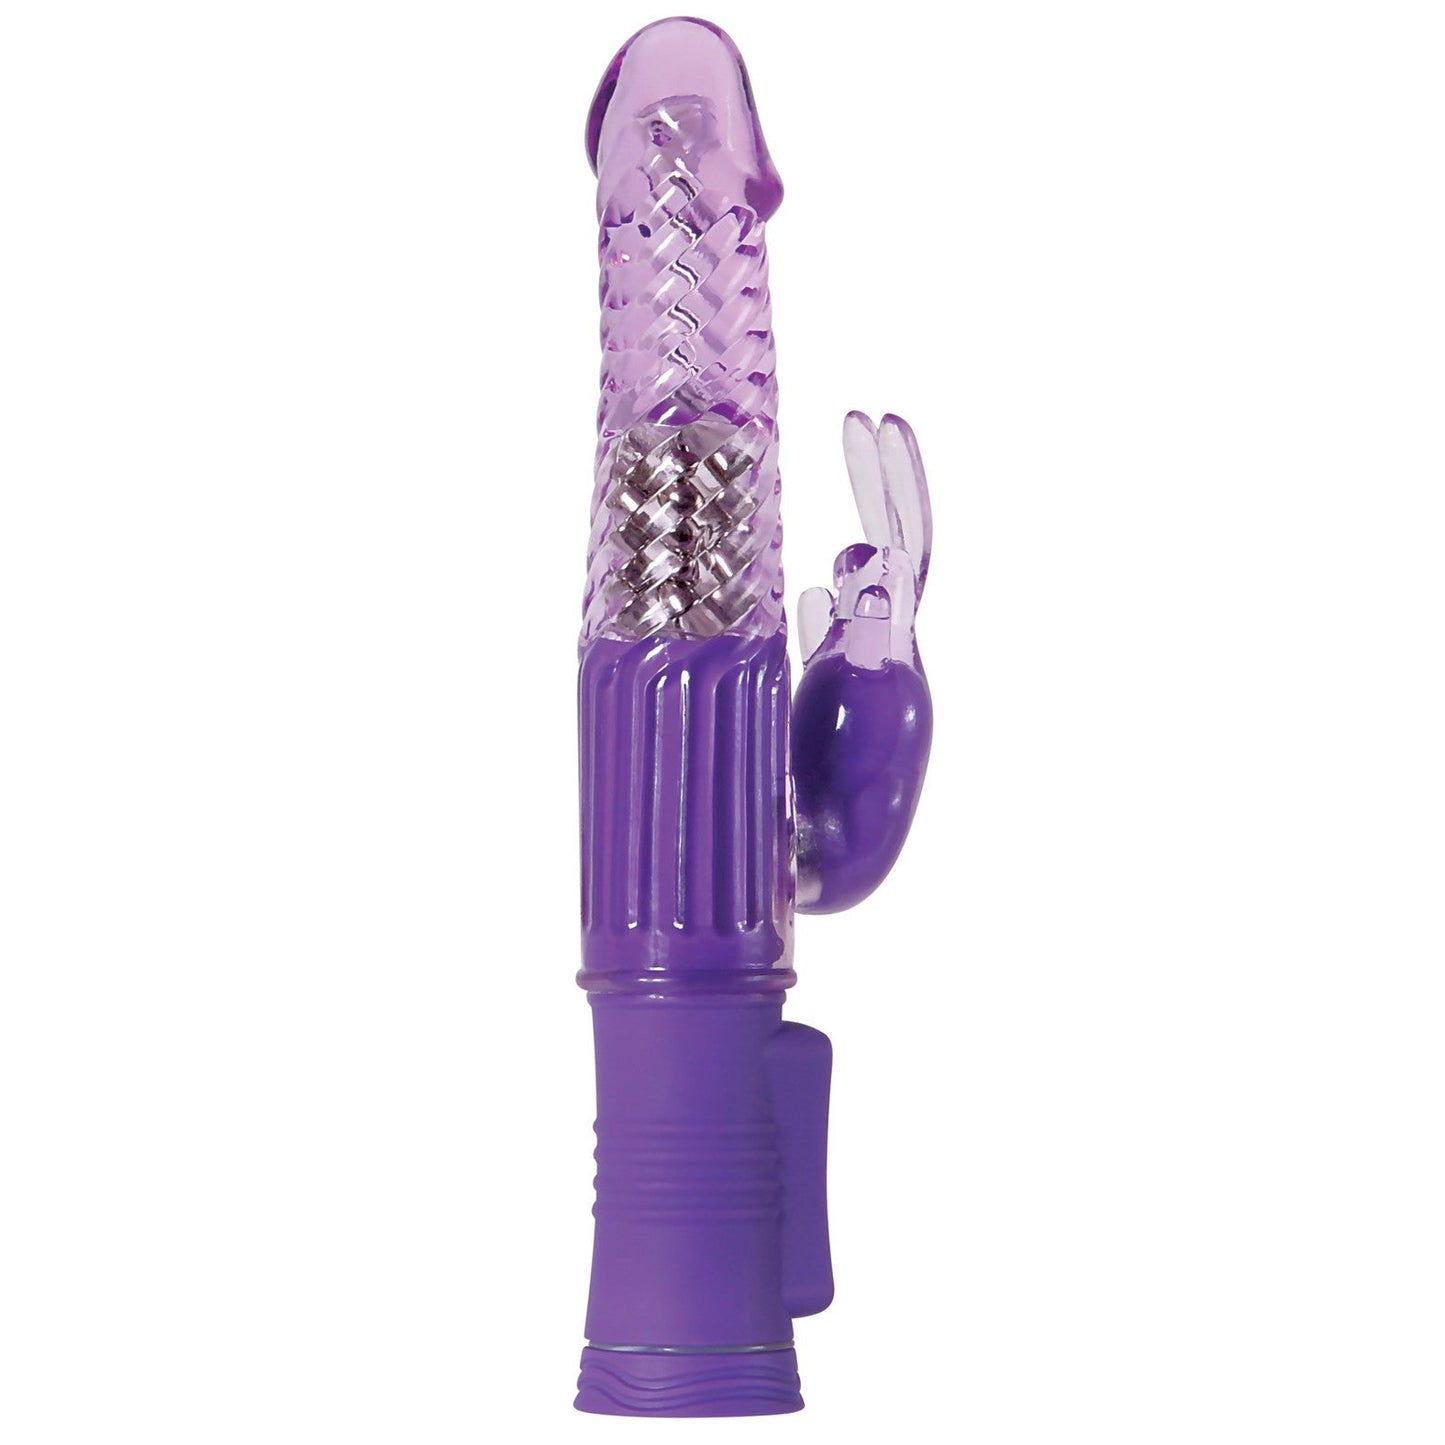 Eve's First Rechargeable Rabbit  G-bliss O-maker- Purple